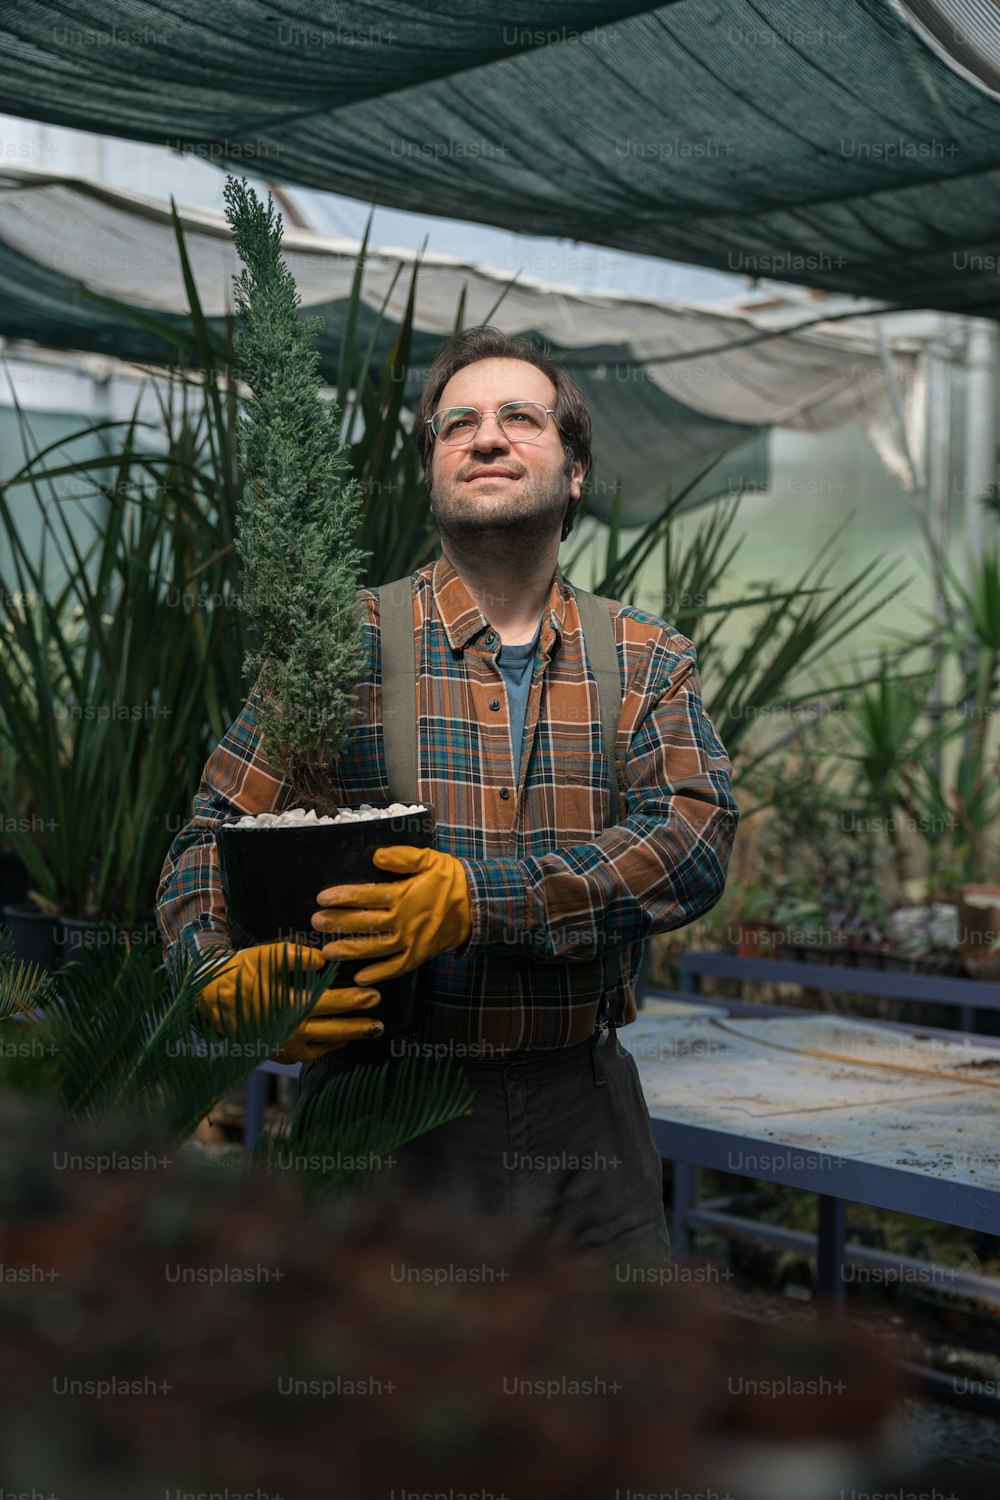 a man holding a potted plant in a greenhouse